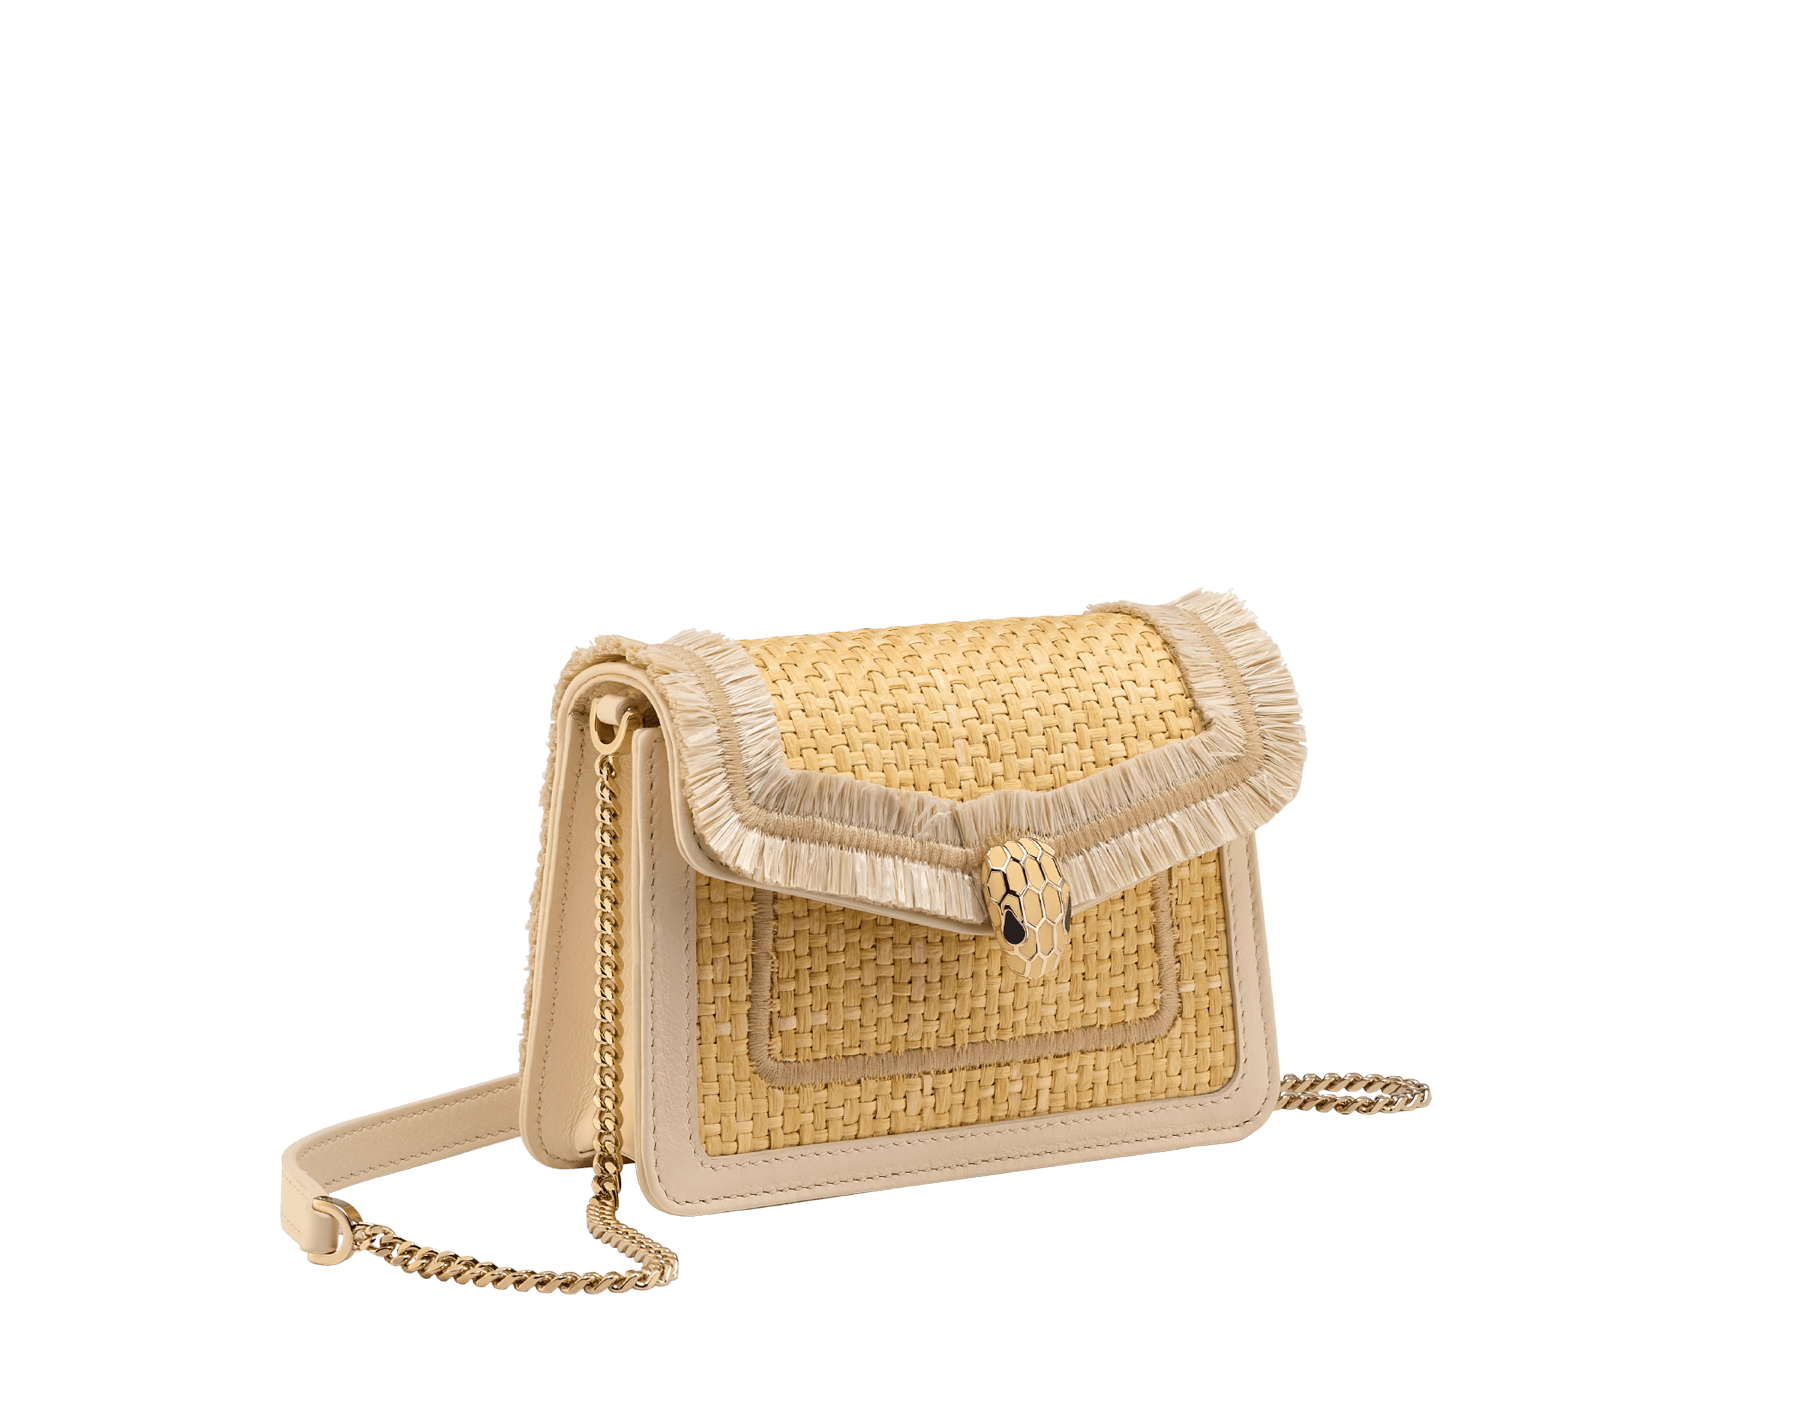 "Serpenti Forever" mini bag in "Molten" light gold karung skin with black nappa leather inner lining, offering a touch of radiance for the Winter Holidays. New Serpenti head closure in light gold-plated brass, complete with ruby-red enamel eyes. Winter Holidays Edition SEA-MINICROSSBODYb image 1